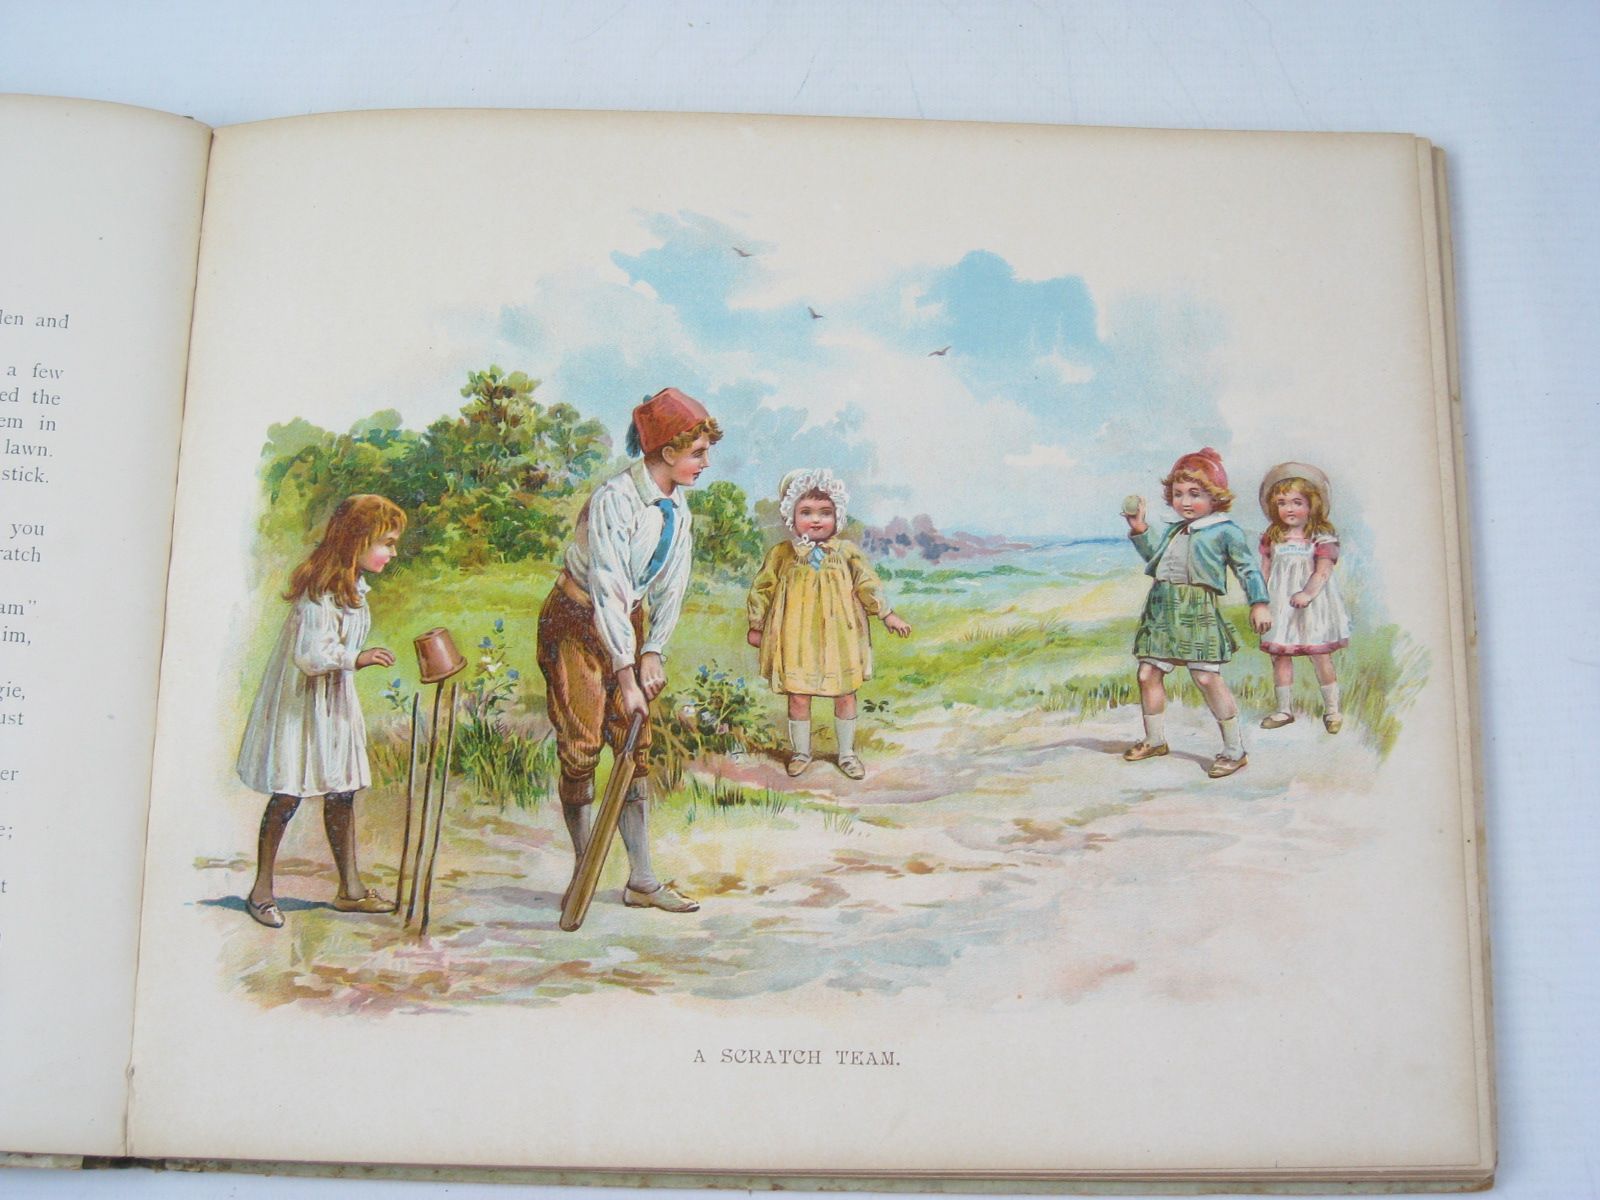 Photo of MERRY FOLK written by Manwell, M.B.
Robarts, Edith
Hoyer, M.A.
et al,  illustrated by Hardy, E. Stuart published by Ernest Nister, E.P. Dutton & Co. (STOCK CODE: 1314093)  for sale by Stella & Rose's Books